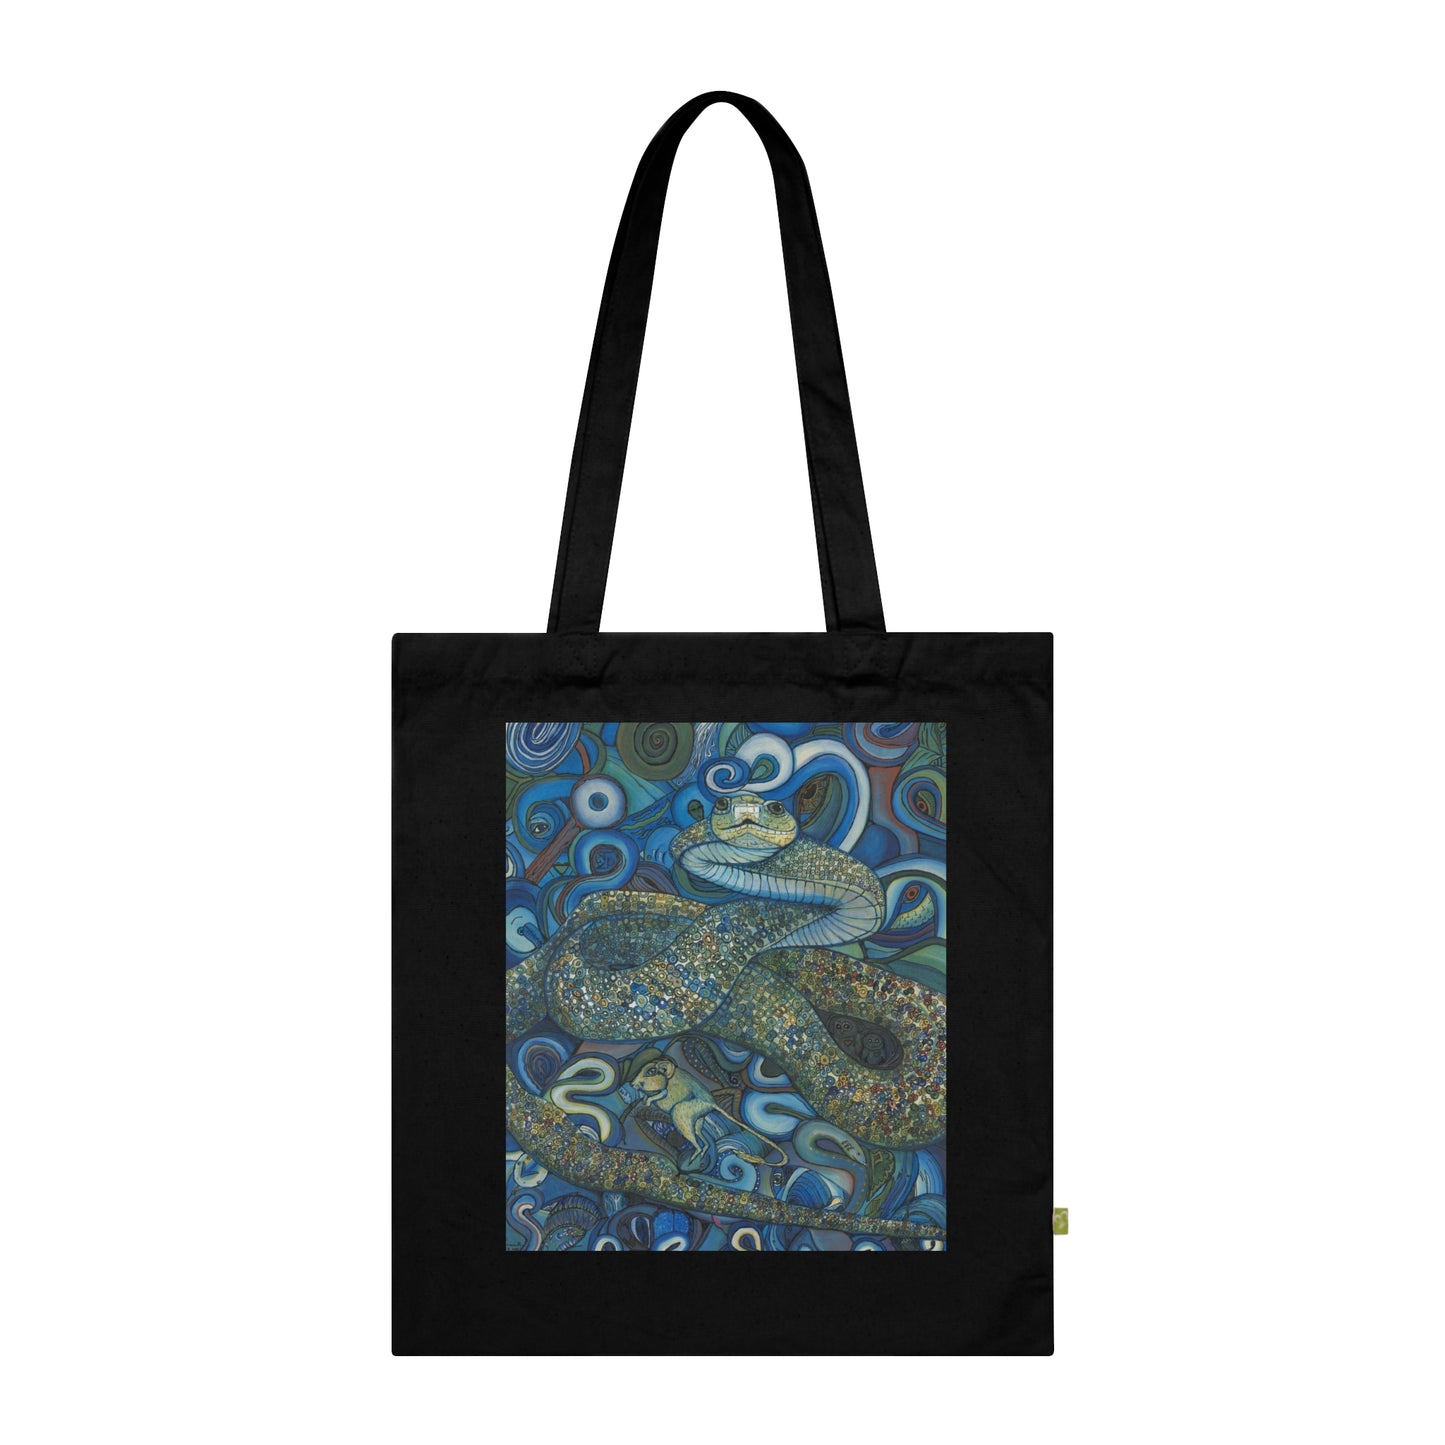 Infinity 8 serpent of good fortune, Organic Cotton Tote Bag